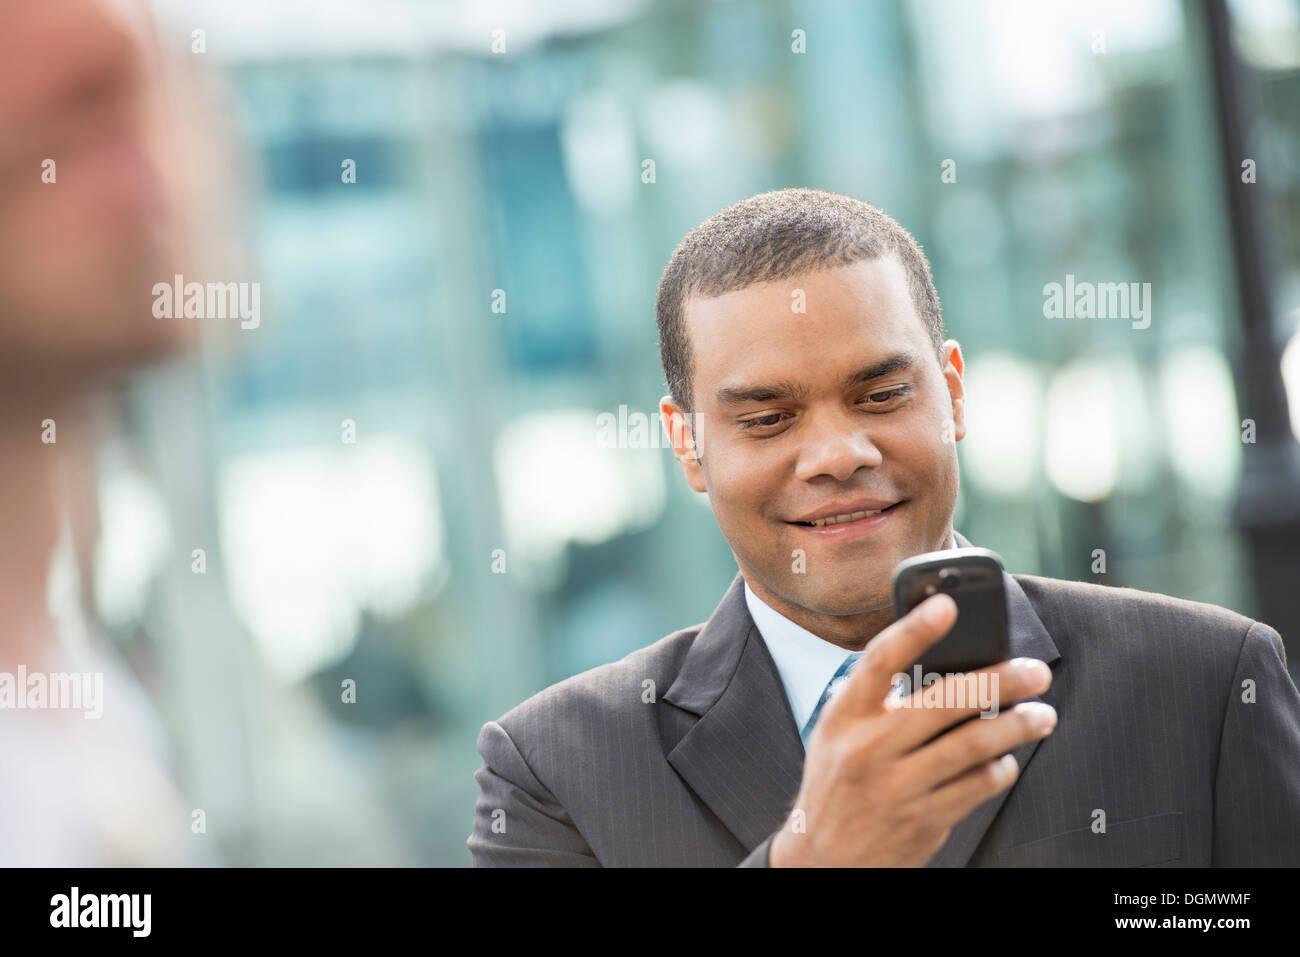 City. A man in a business suit checking his messages on his smart phone. Stock Photo